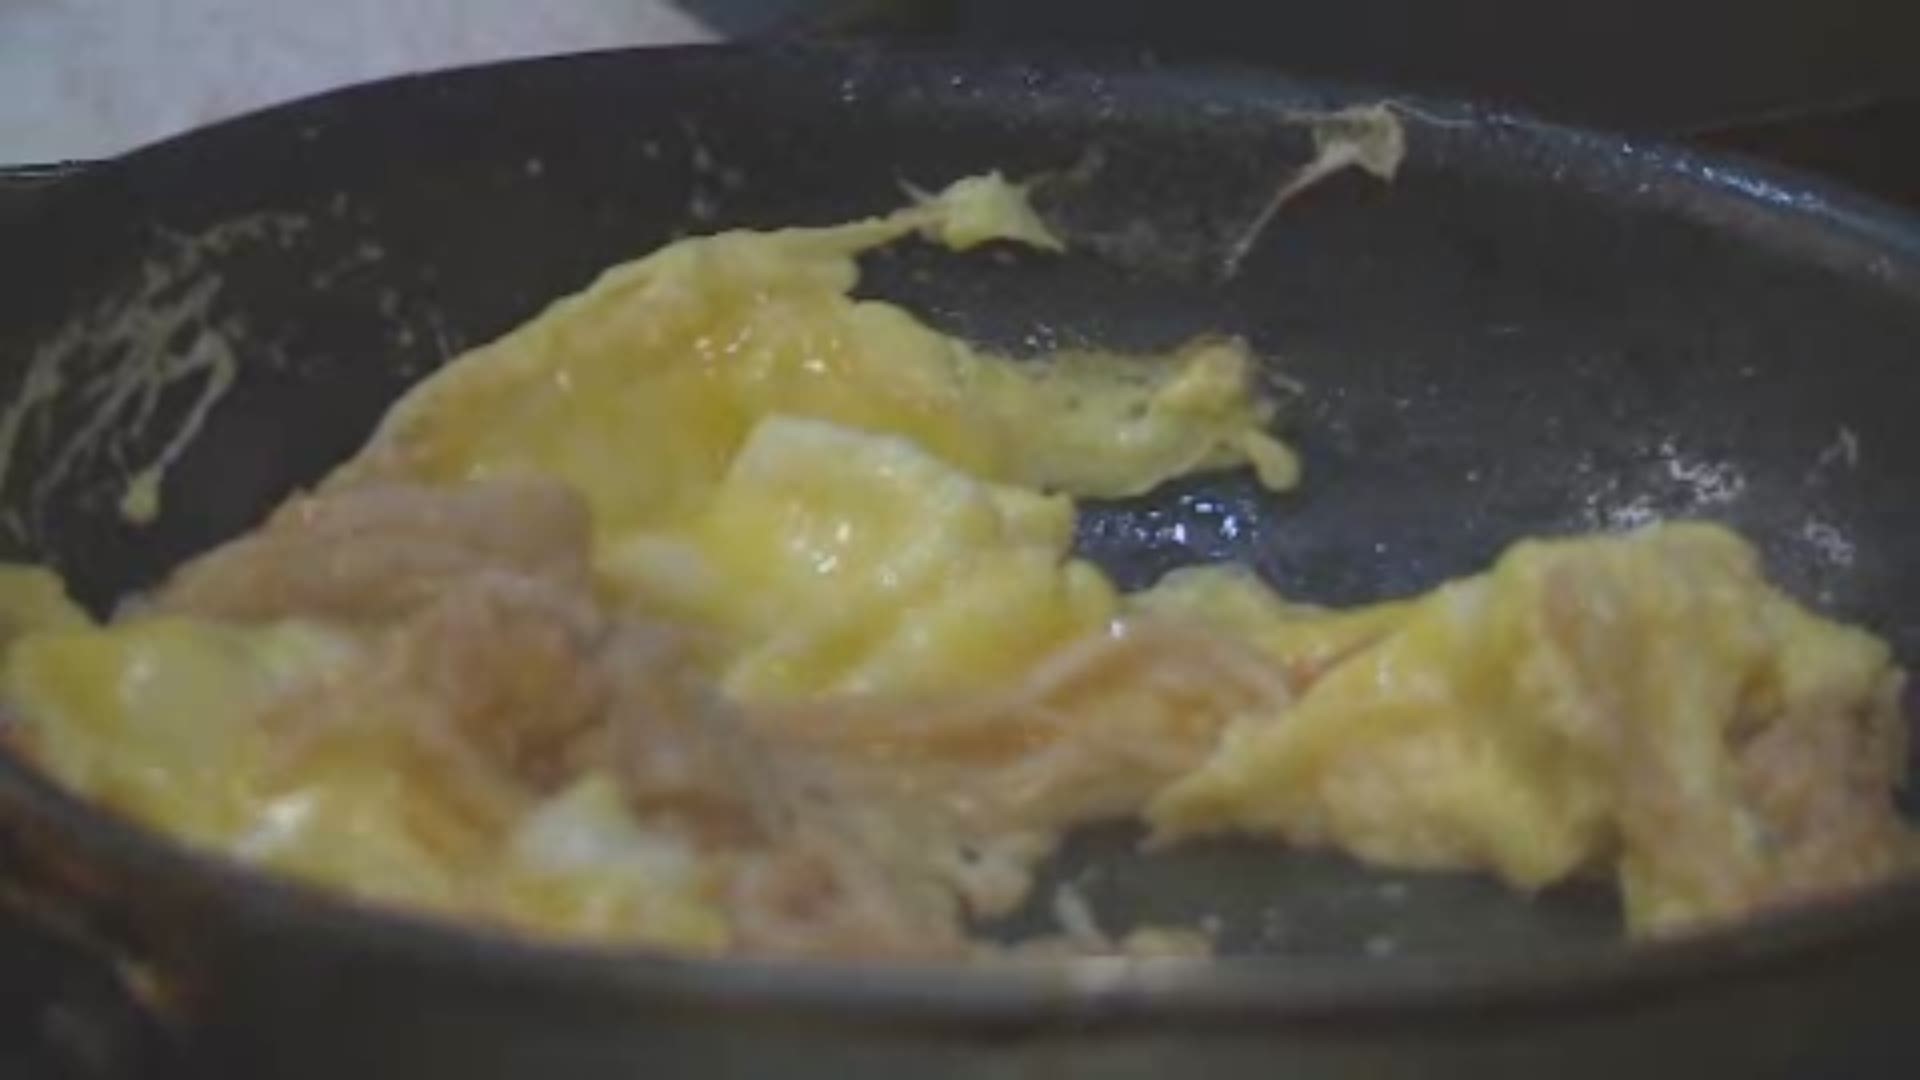 A local breakfast restaurant is moving into the Omni Hotel soon and reporter Kristin Goodwillie talked with the owners about their expansion and success.